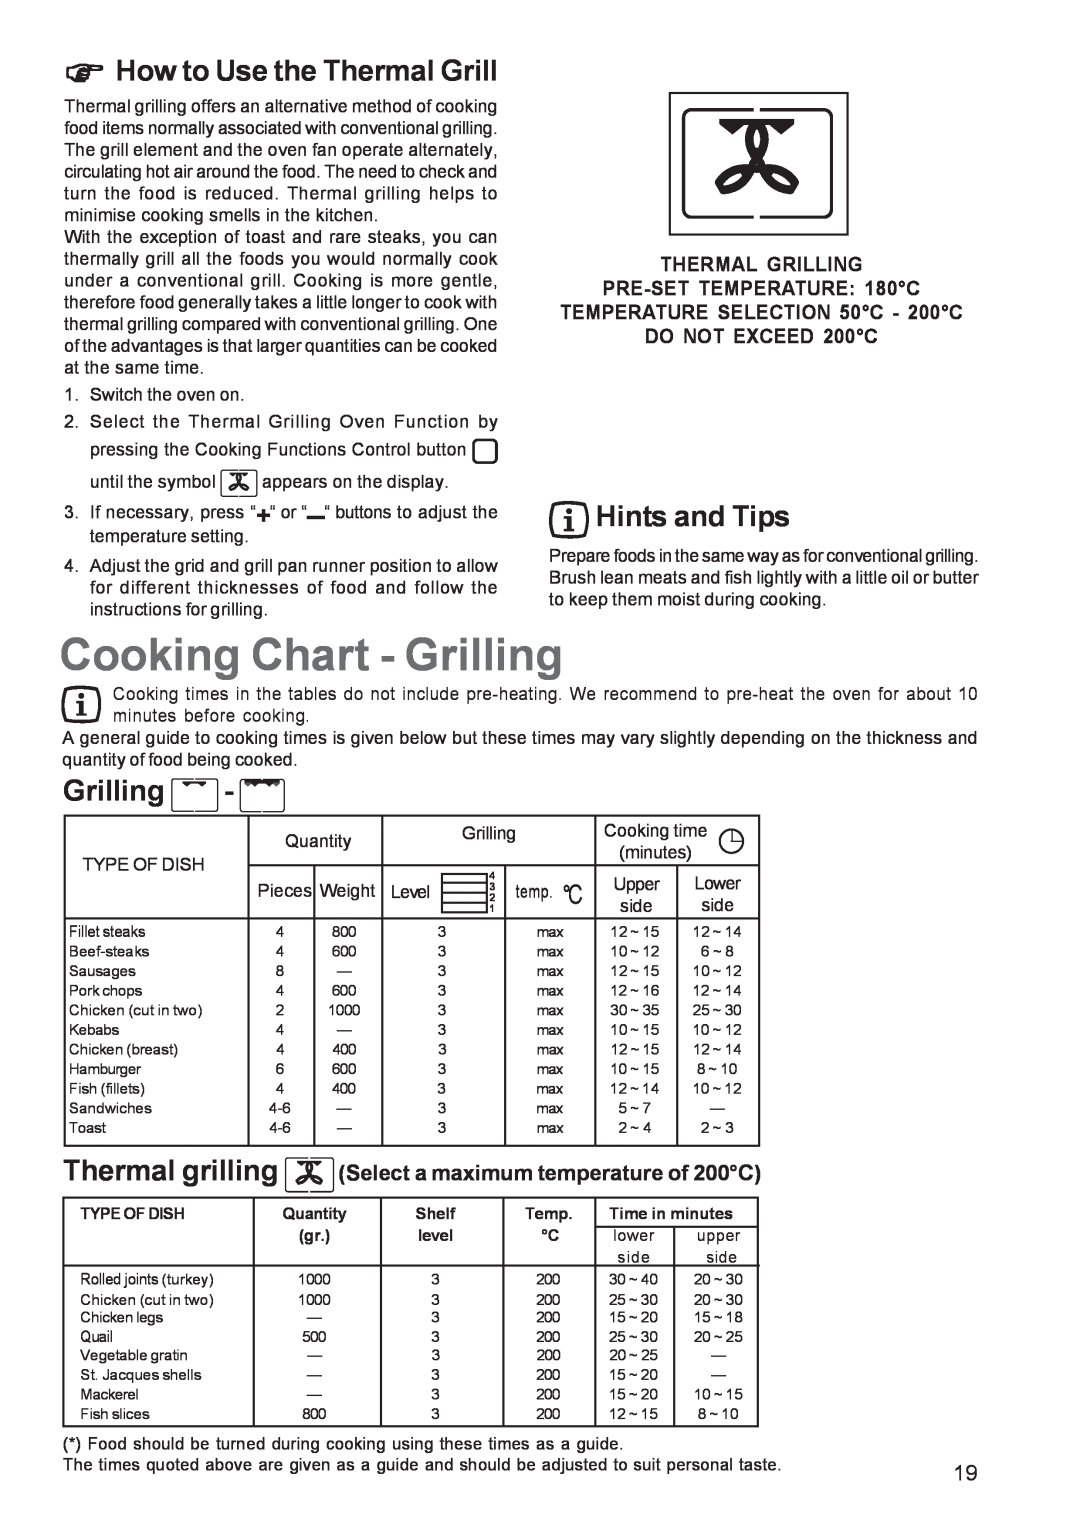 Zanussi ZBS 1063 manual How to Use the Thermal Grill, Grilling, Thermal grilling, THERMAL GRILLING PRE-SETTEMPERATURE: 180C 